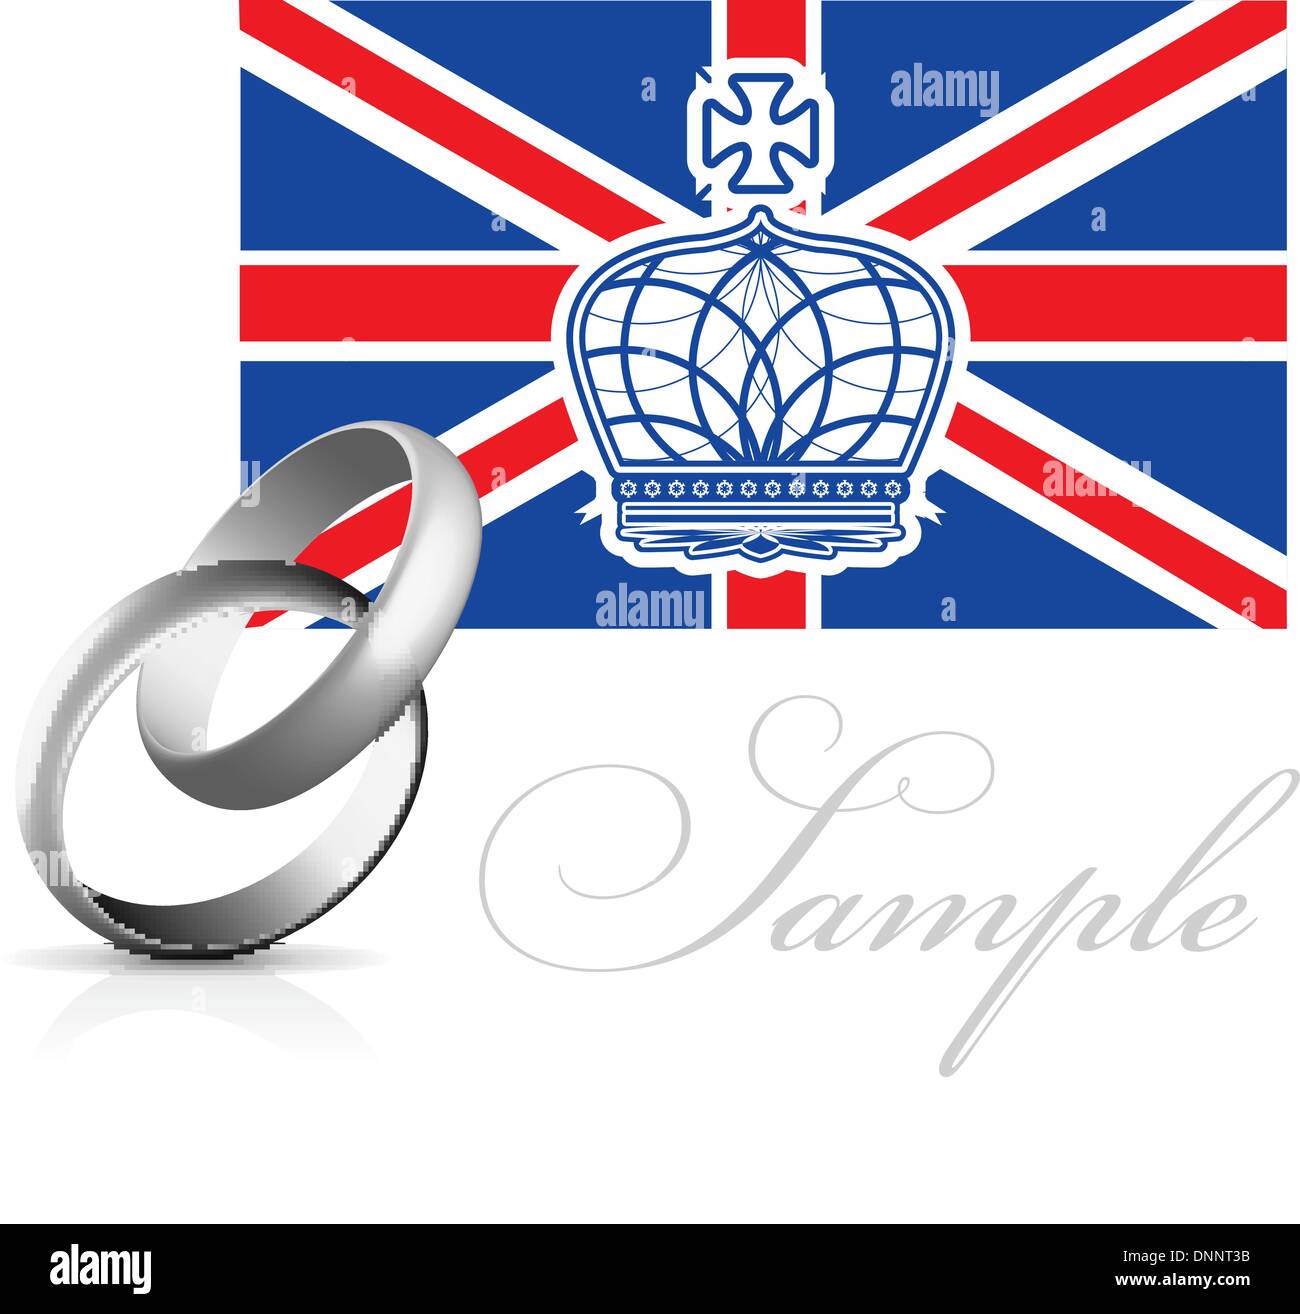 Royal wedding of Prince William and Kate Middleton. Vector illustration Stock Vector